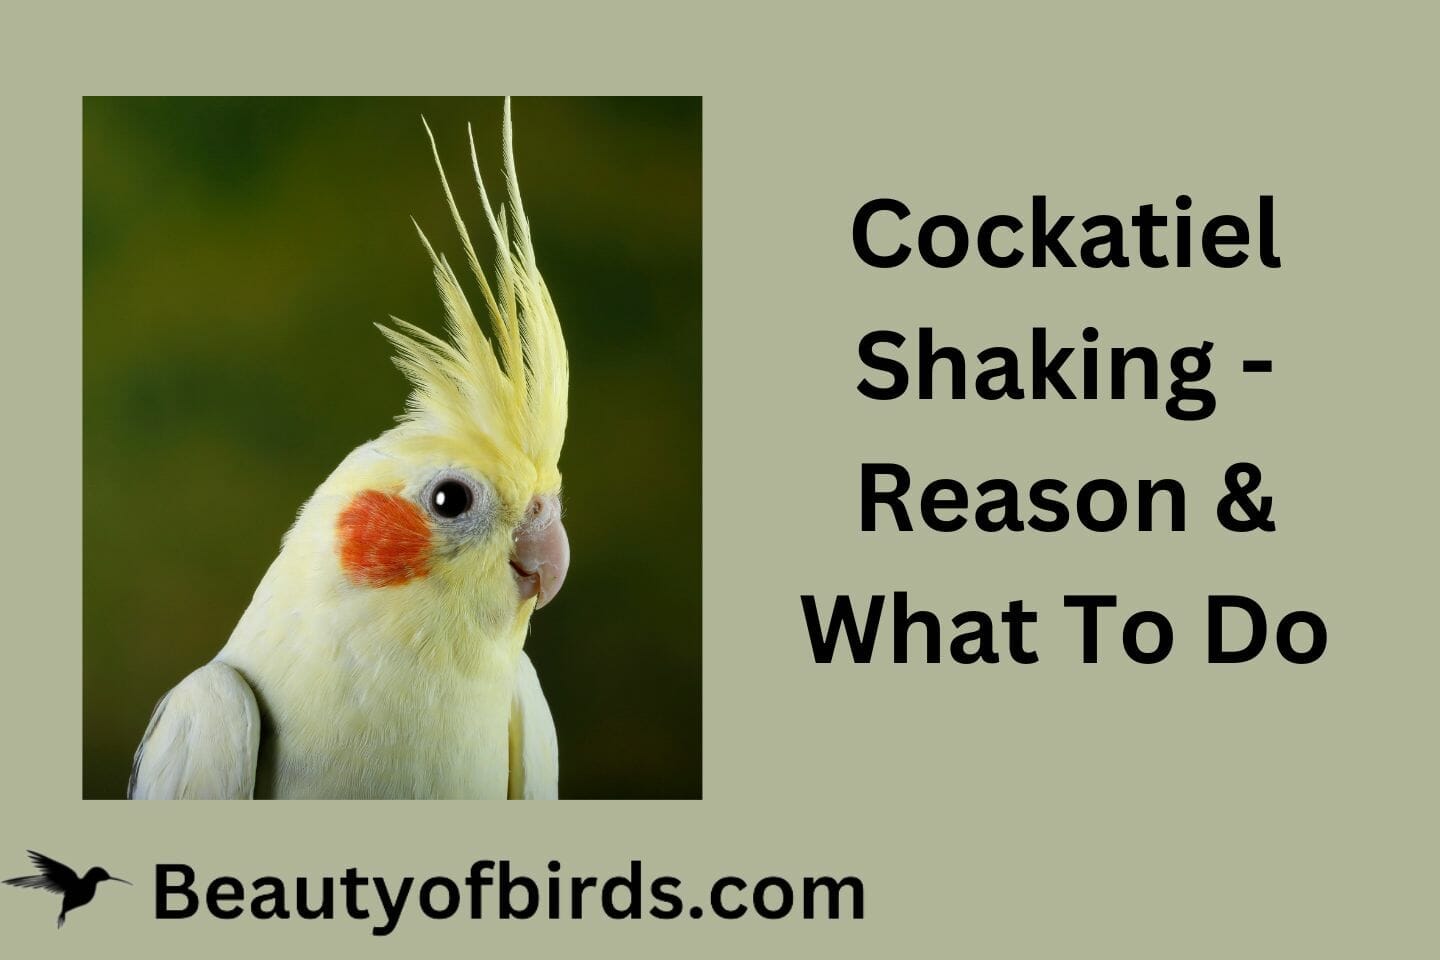 Cockatiel Shaking - Reason & What To Do